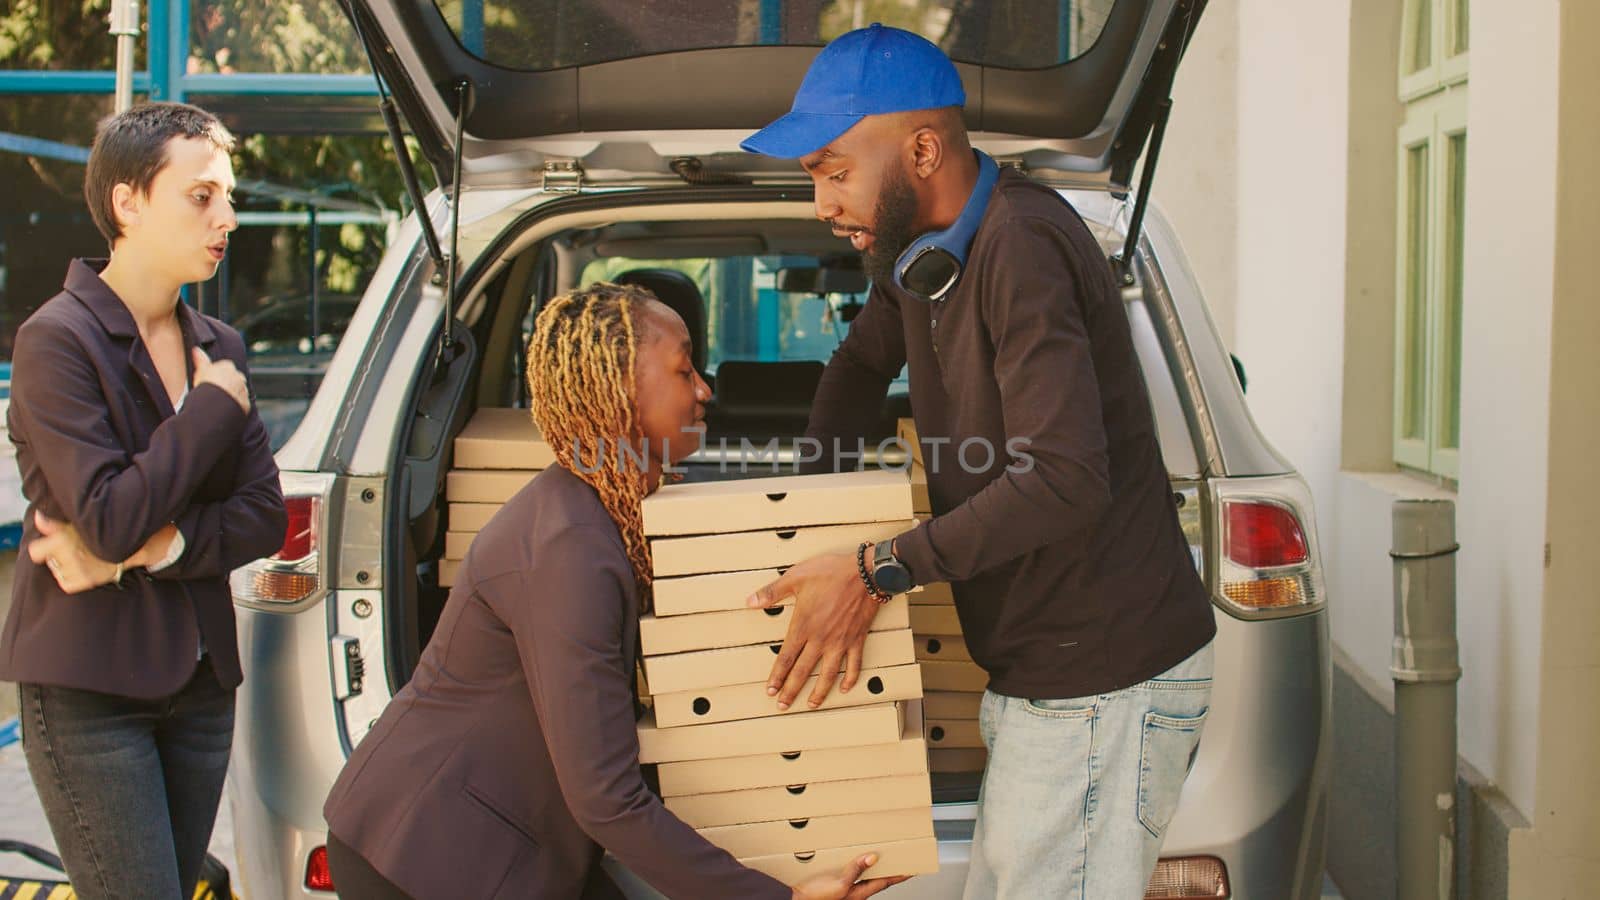 Male pizzeria courier giving pizza boxes to customers at office building, delivering big restaurant order in car trunk. Taking fastfood meal packages out of vehicle to deliver to diverse women.